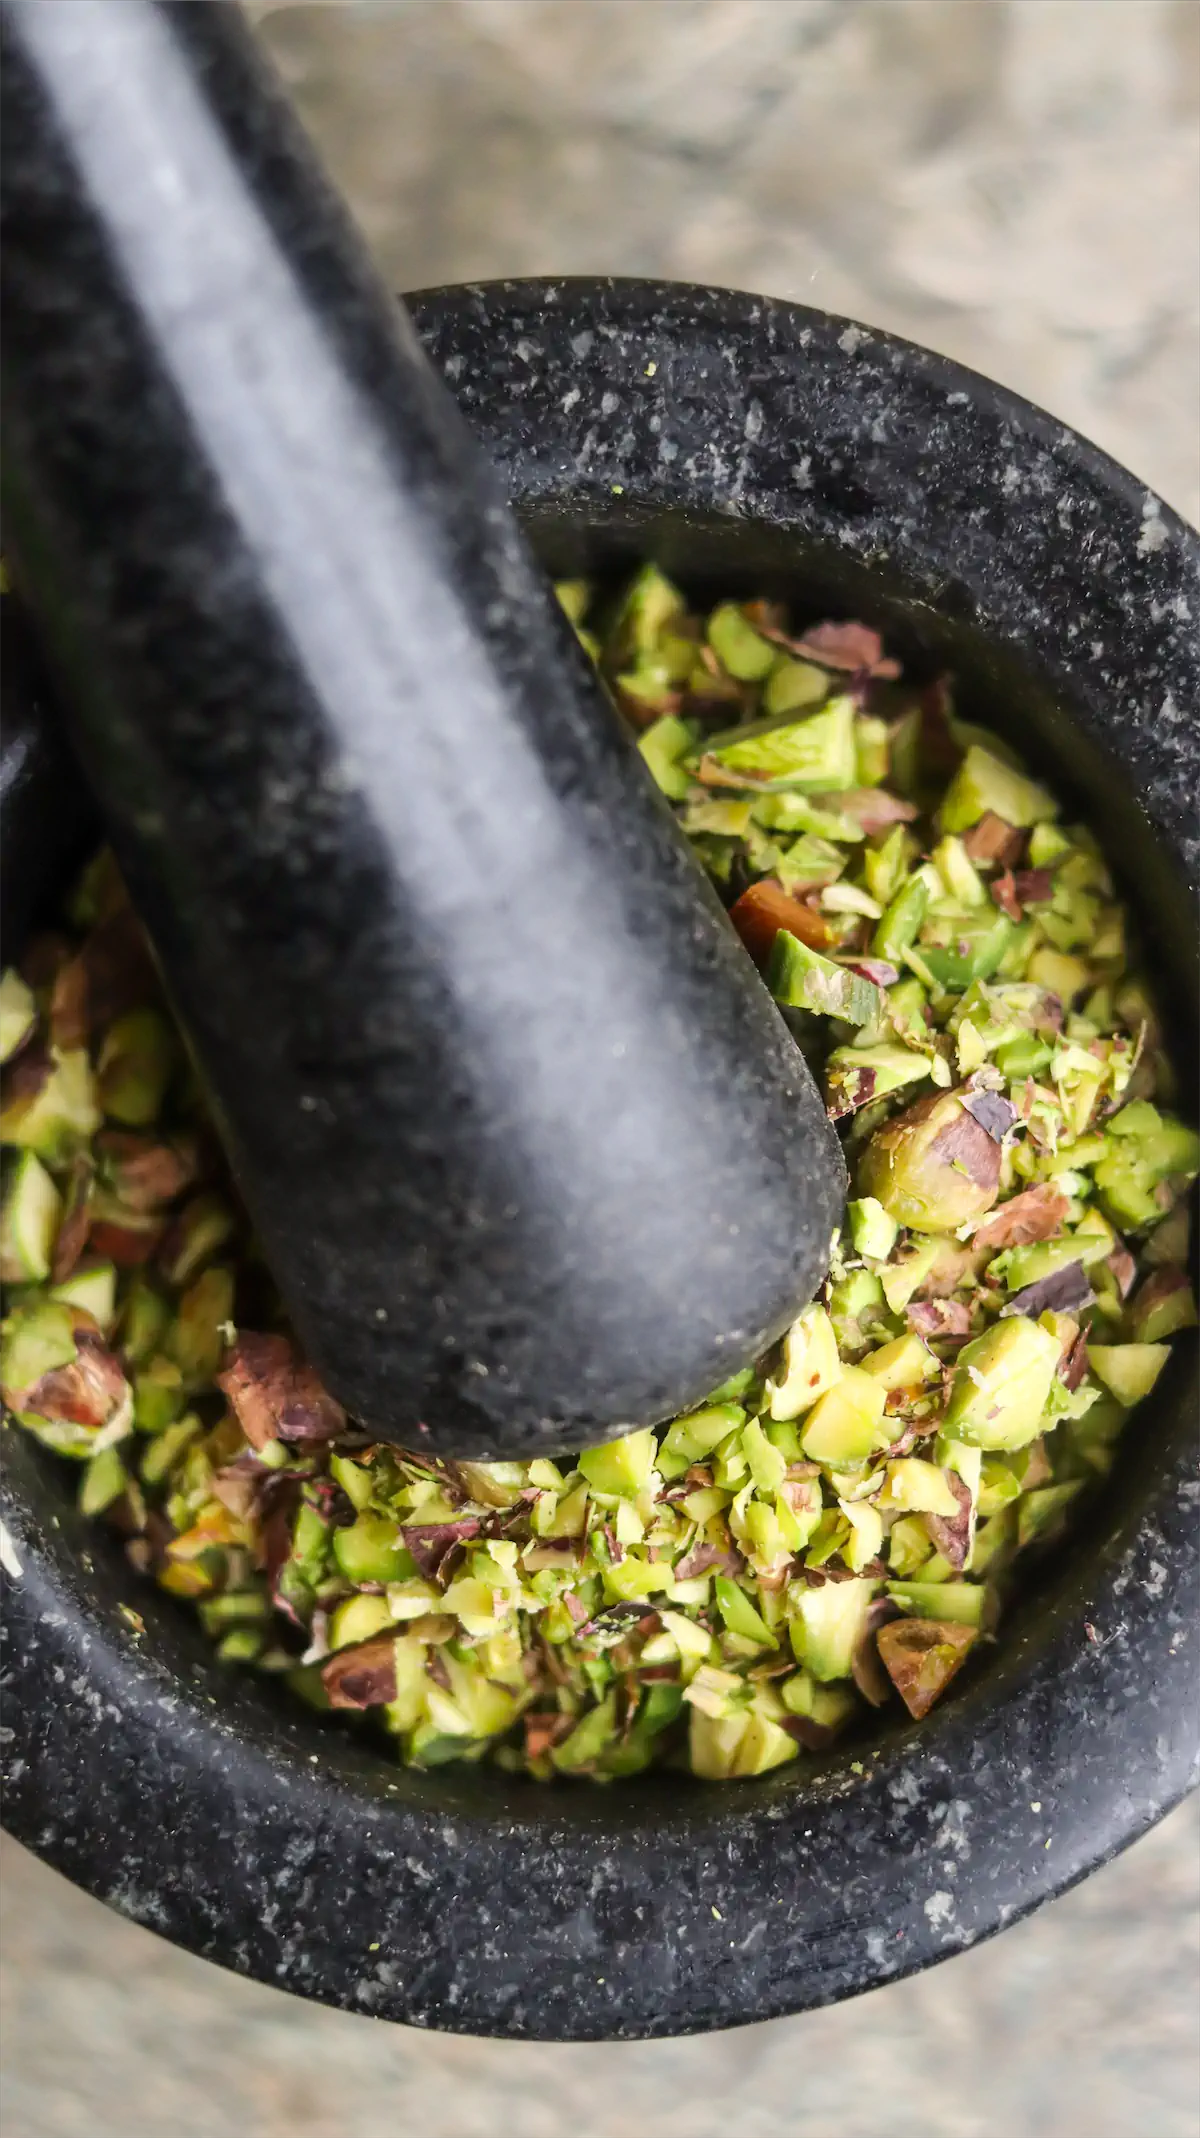 Pistachios are being crushed in a pestle and mortar.